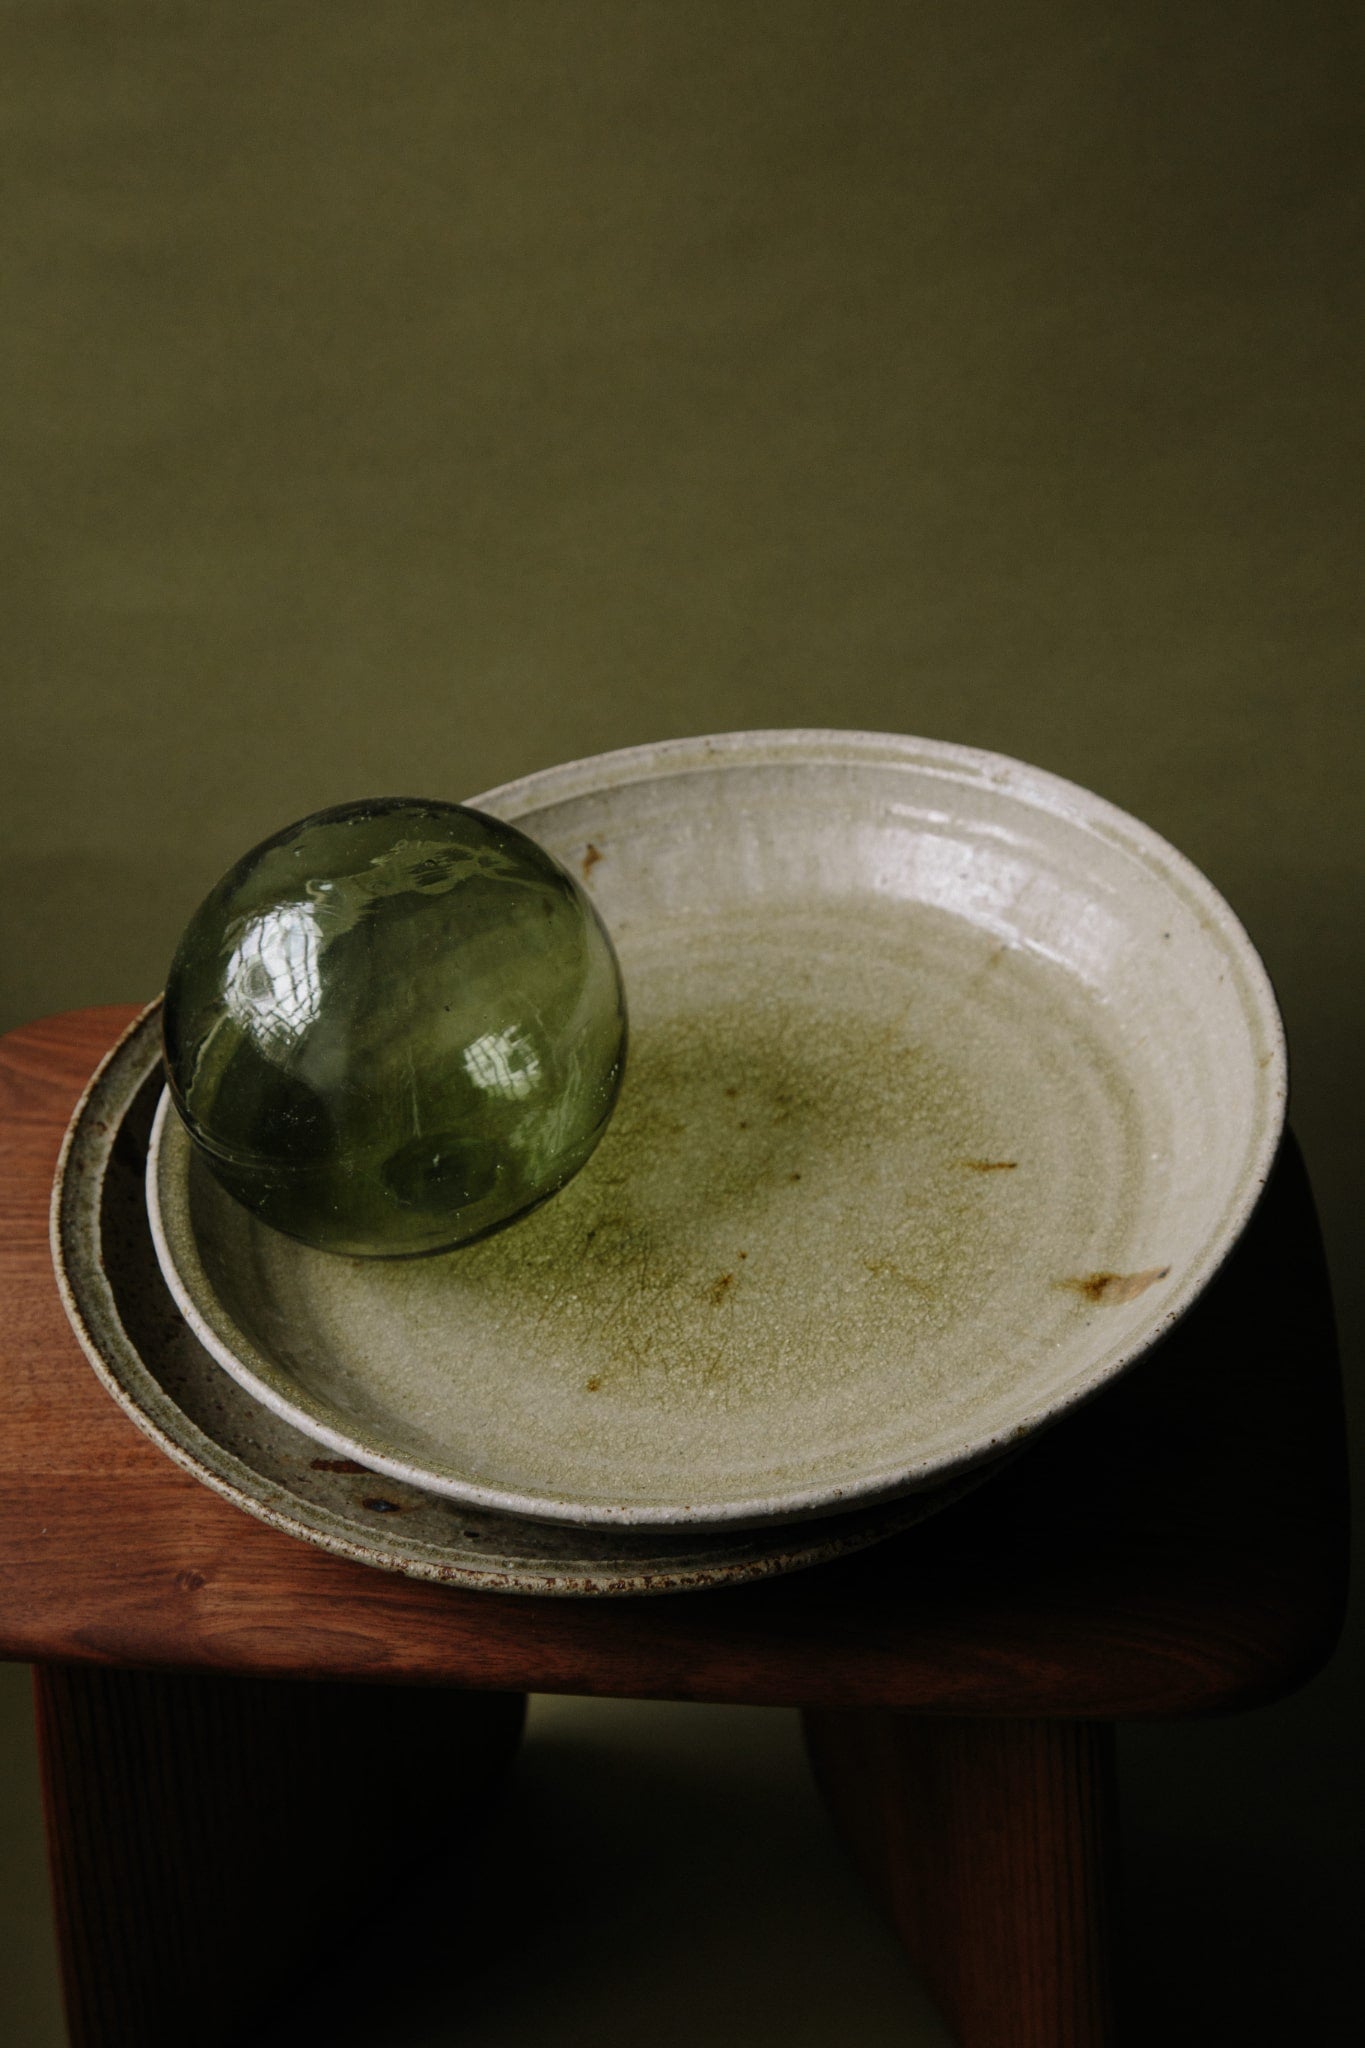 ALT=A stack of unique green ceramic platters with a green glass sphere balanced on the top platter. The glaze being reflected in natural light.